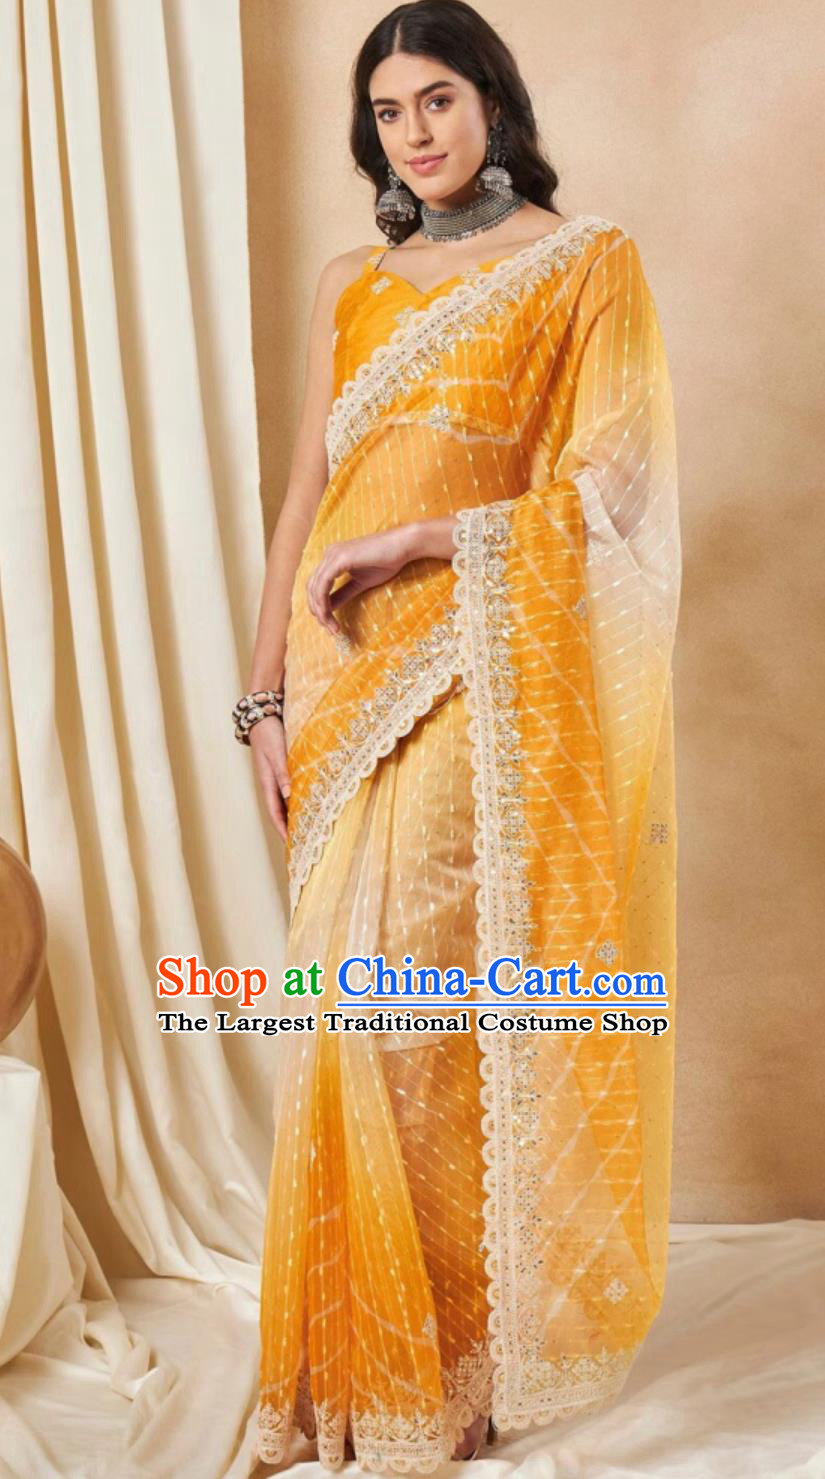 Traditional Festival Orange Sari Dress India Woman Embroidery Costume Indian National Clothing